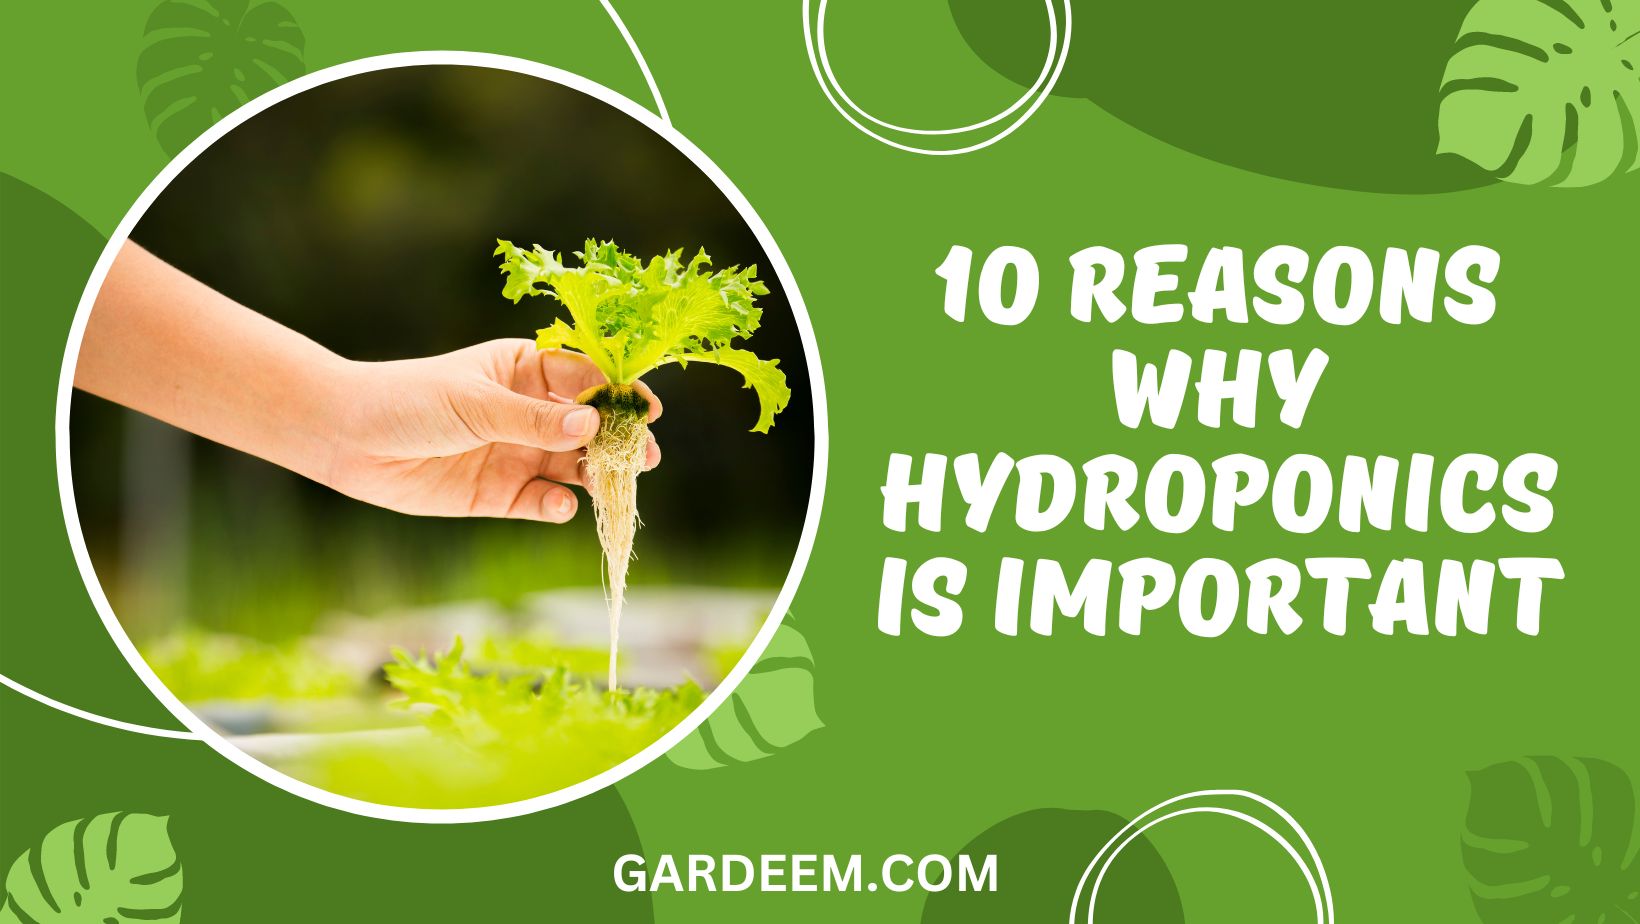 Why Hydroponics Is Important